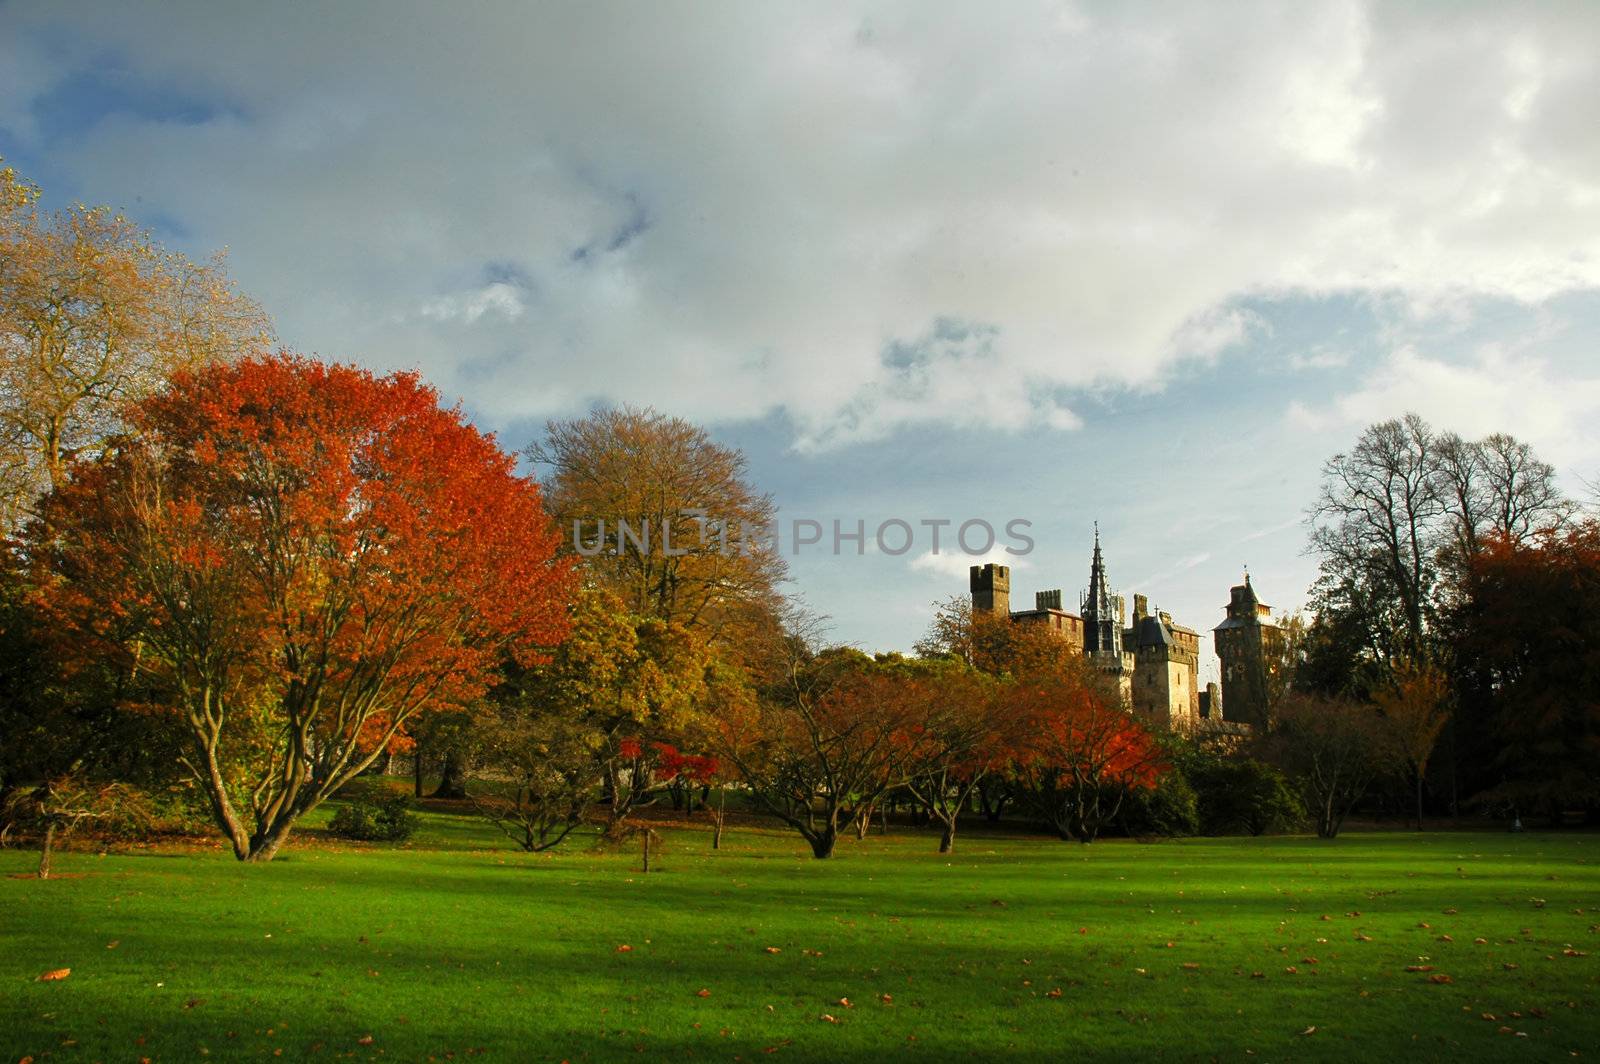 Bute park in cardiff with castle and autumn colours